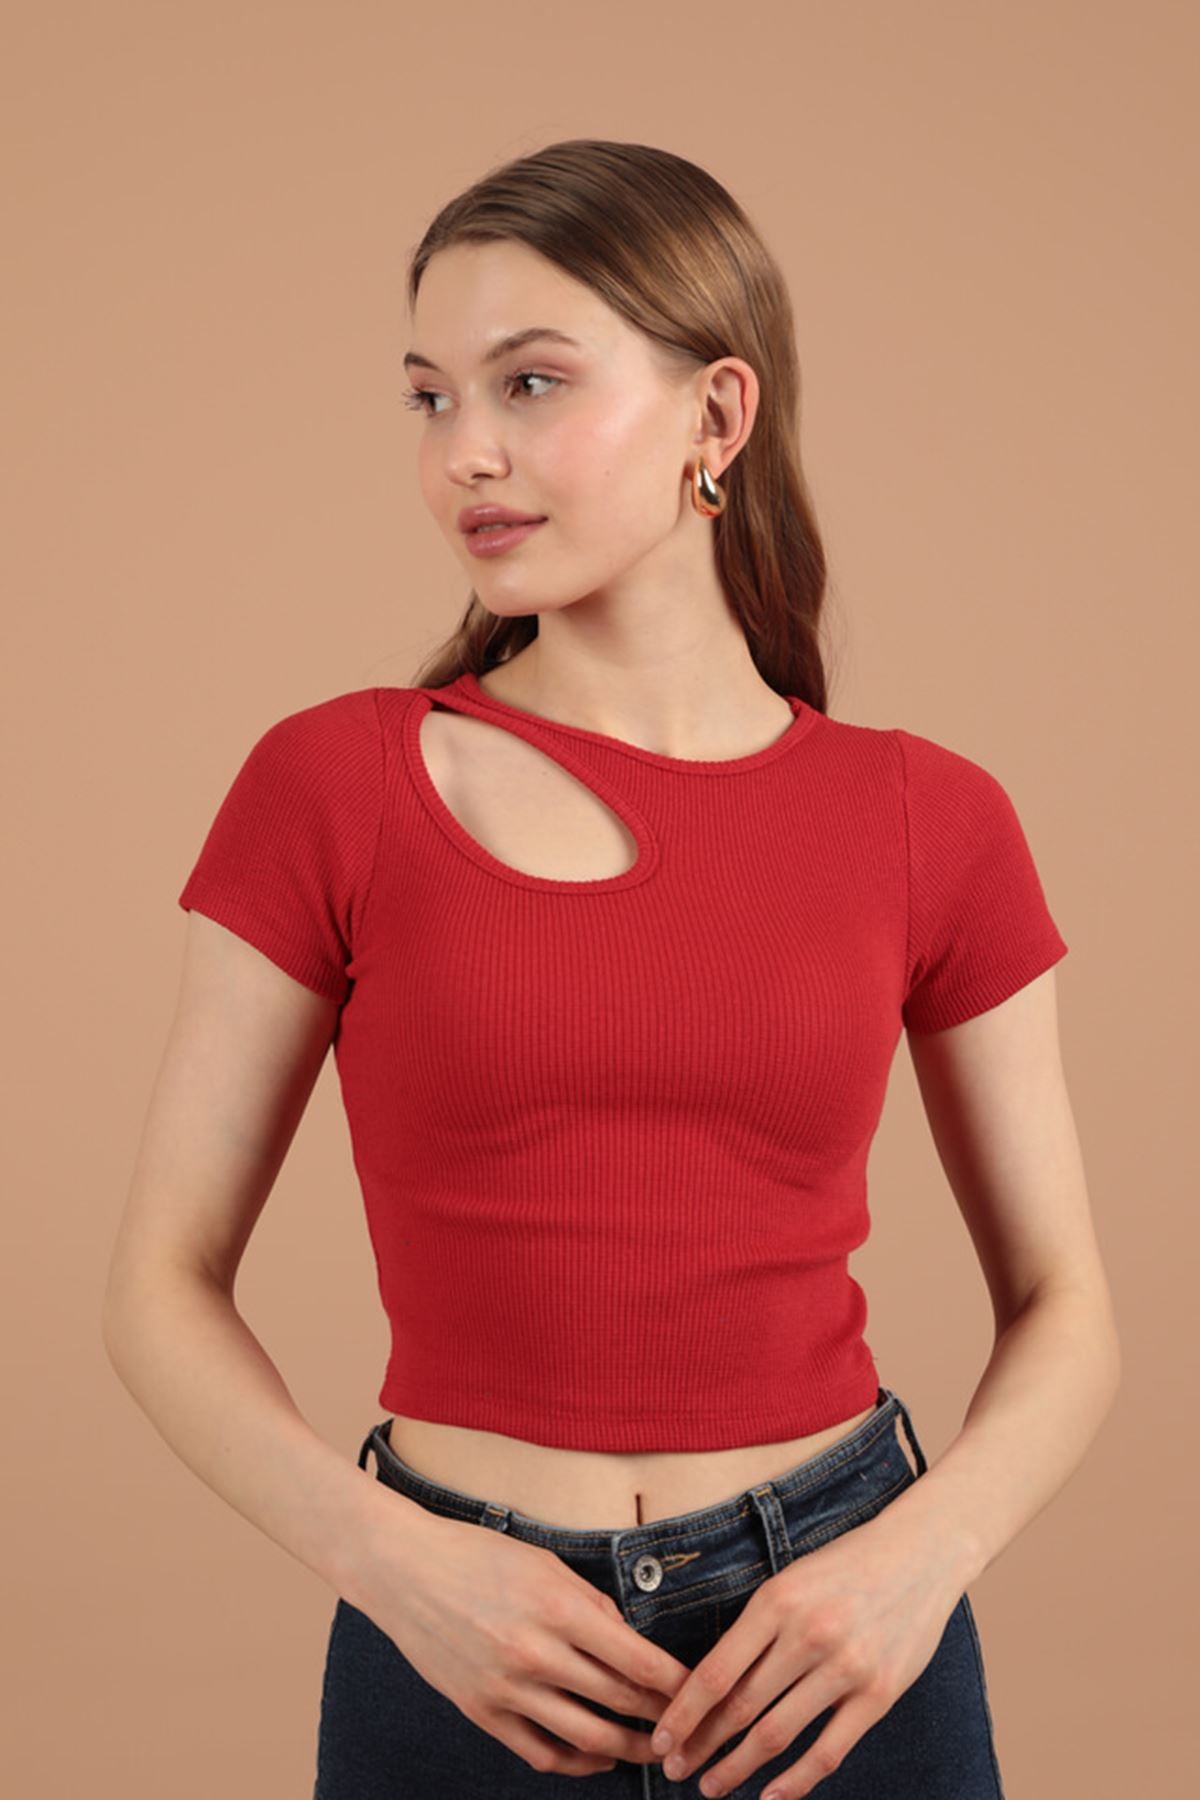 Camisole Drop Neck Women's Short Sleeve Blouse-Red - STREETMODE™